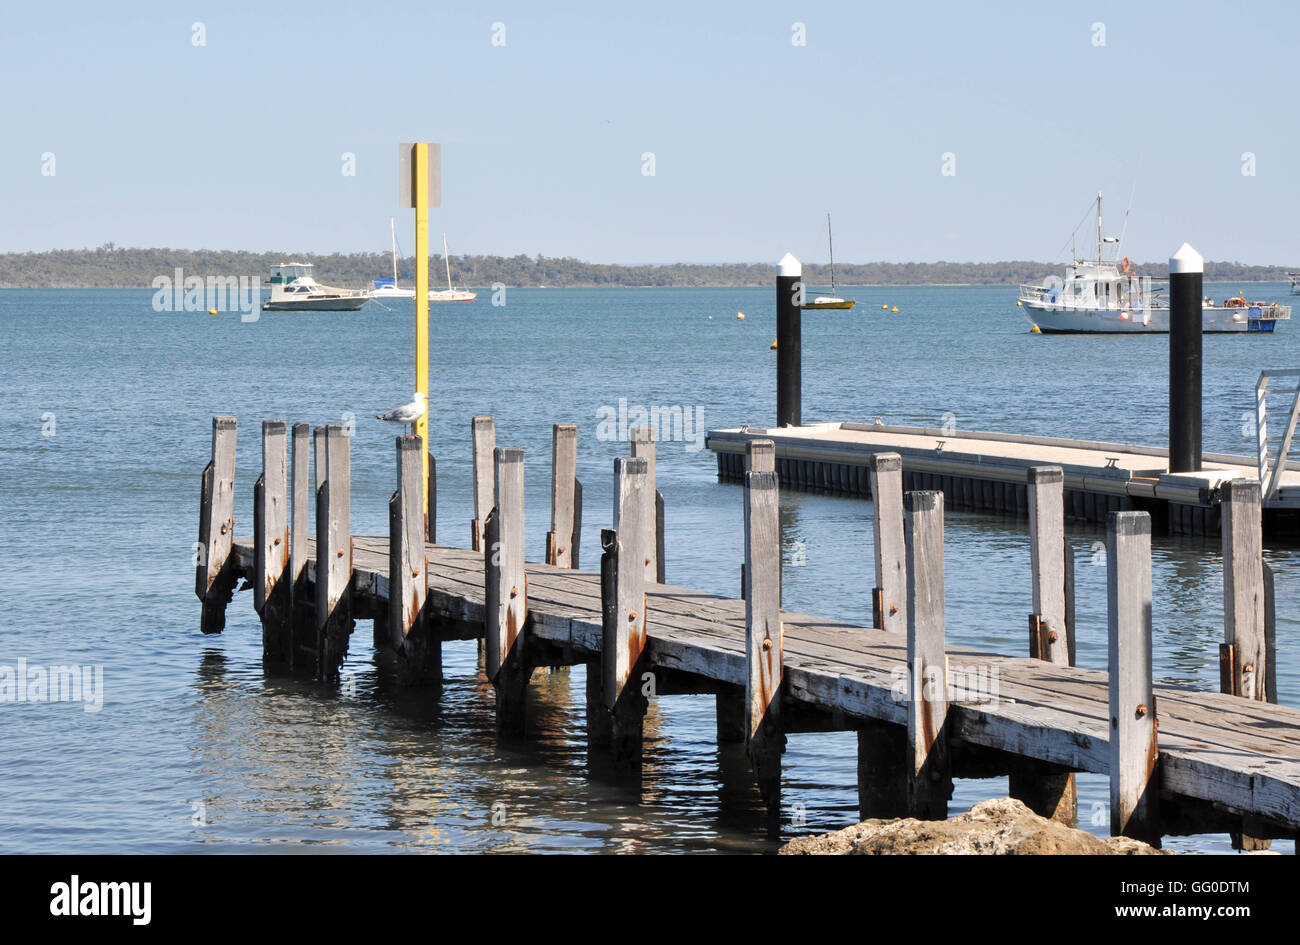 Wooden Jetty And Floating Dock In The Calm River In Mandurah Western Australia With Yachts In The Background Under A Clear Sky Stock Photo Alamy